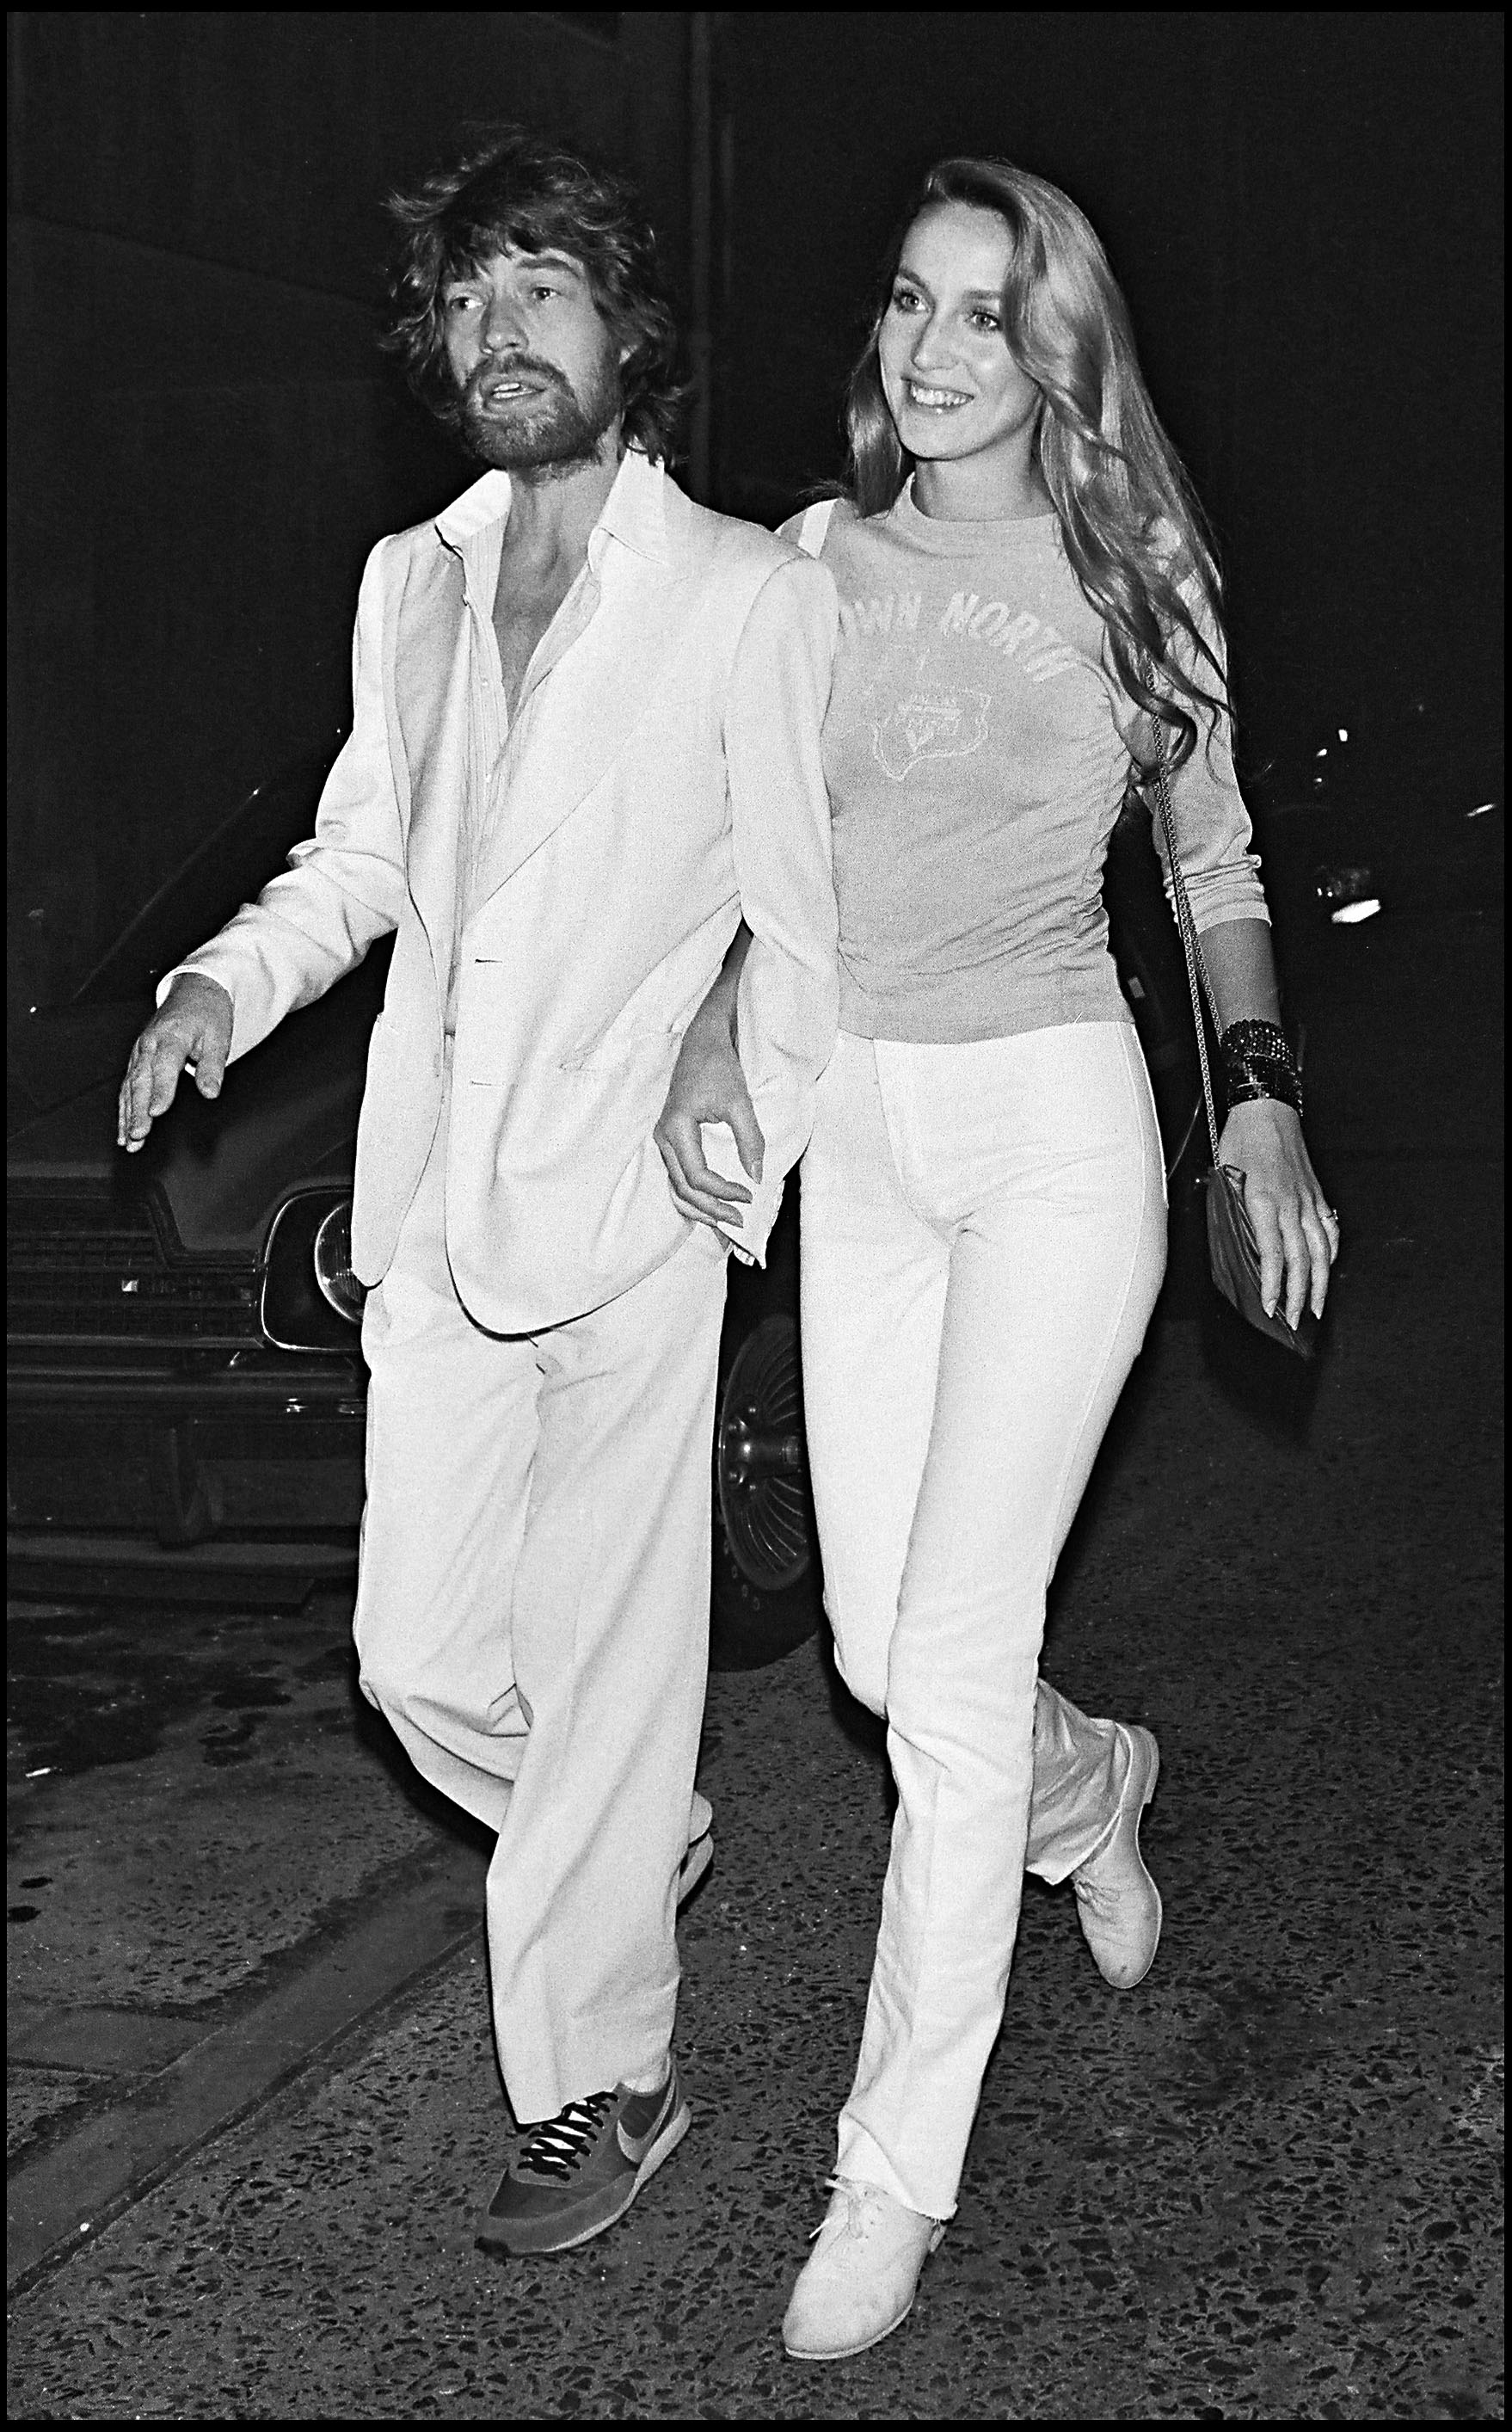 Jerry Hall and Mick Jagger walking the streets 1979